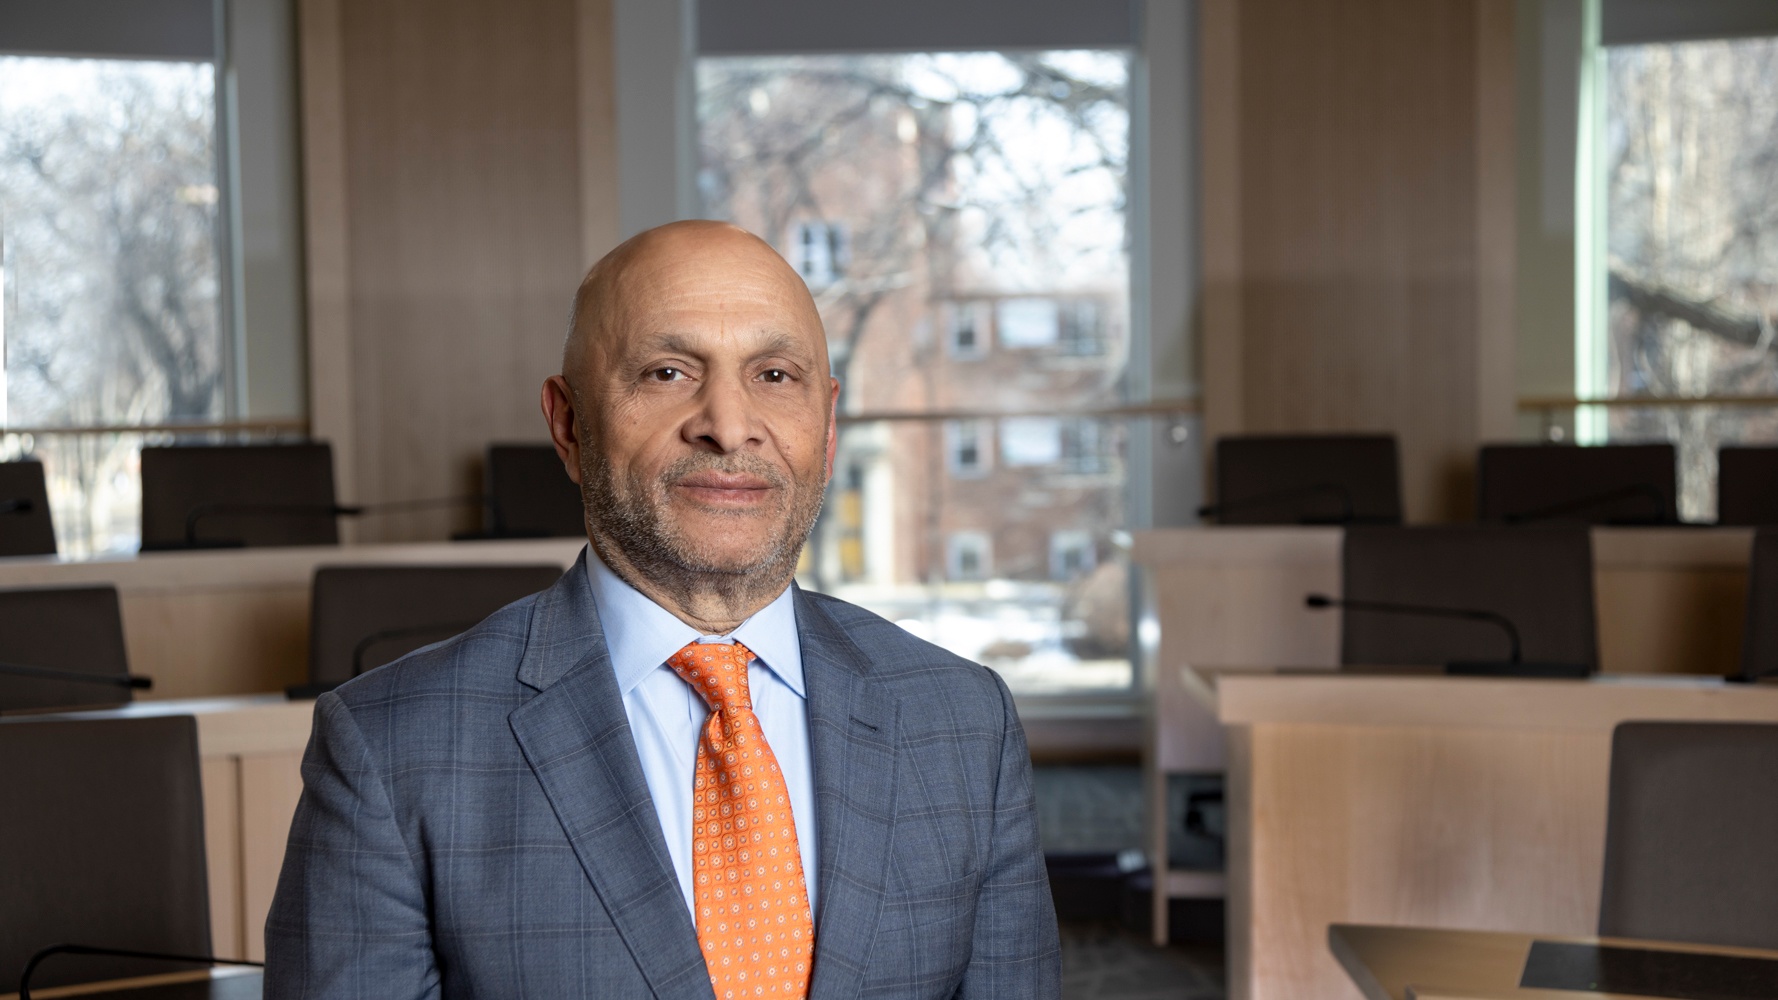 Entrepreneur, community leader and University of Alberta graduate Nizar J. Somji has been elected as the university’s 23rd chancellor. He will begin his four-year term this June. (Photo: Dustin Delfs)